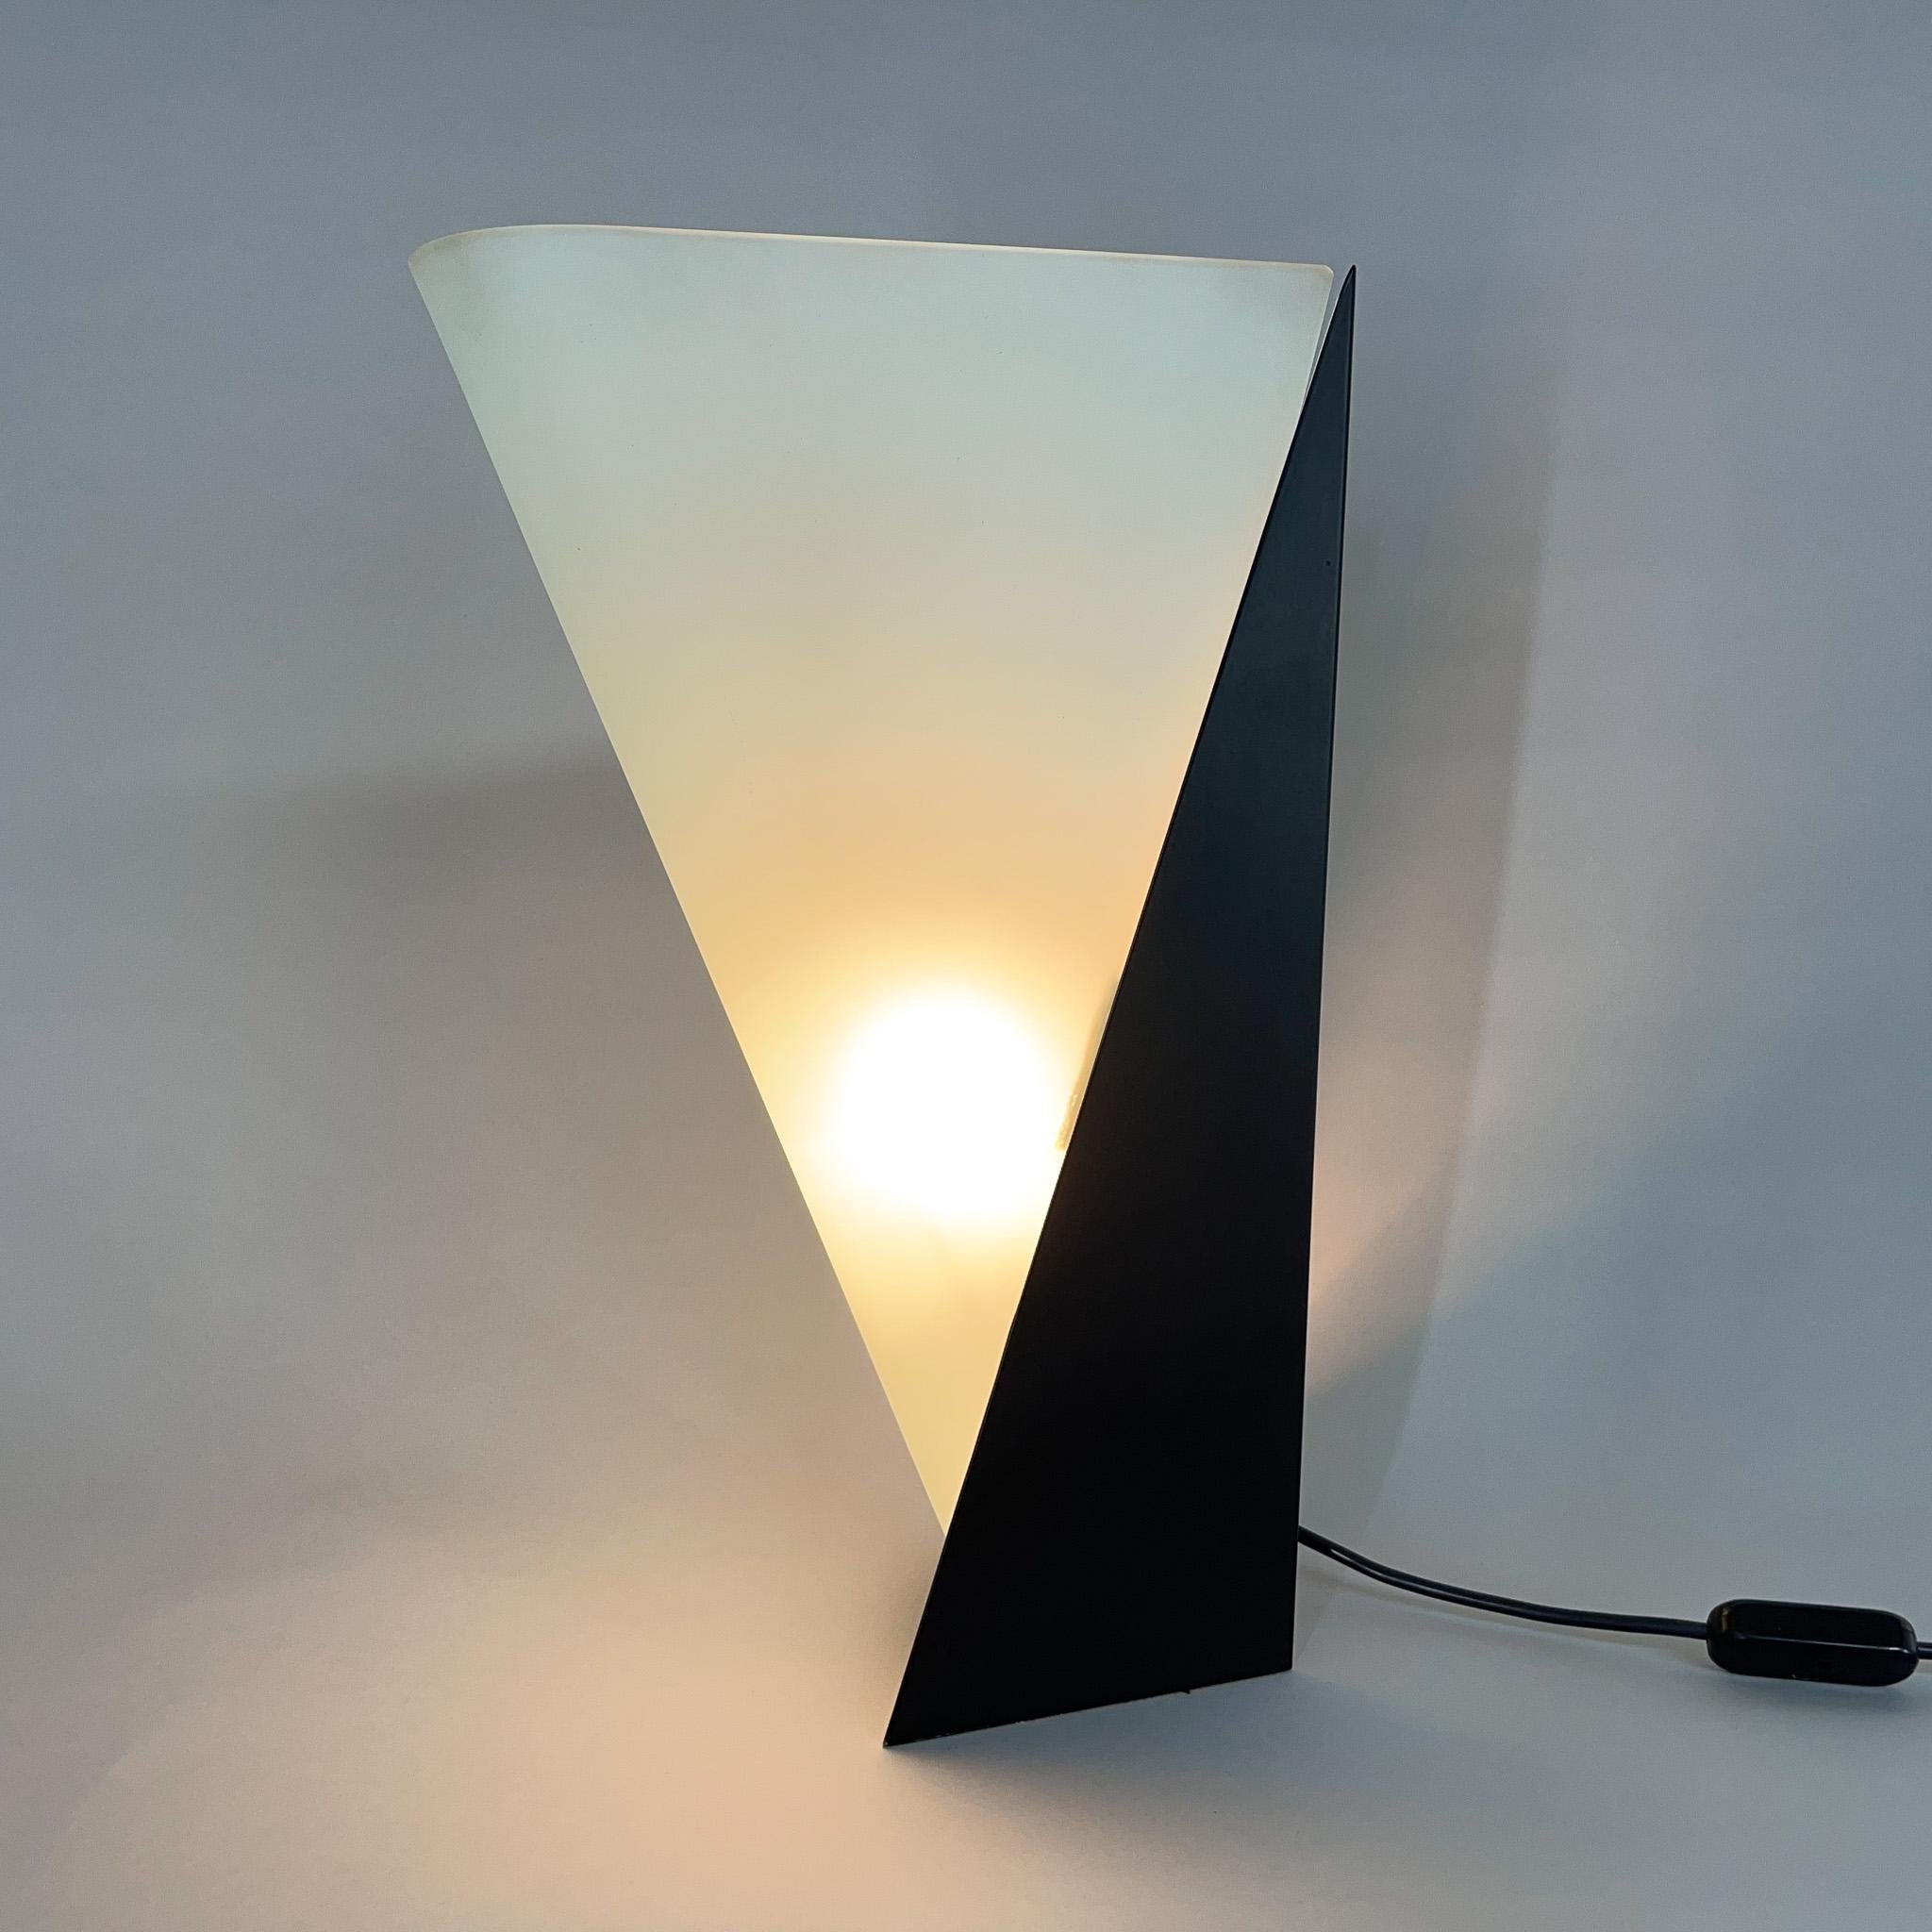 Beautiful vintage Italian table lamp from the 1970's by Stilnux. Unusual asymmetrical shape, made of etched glass and metal.